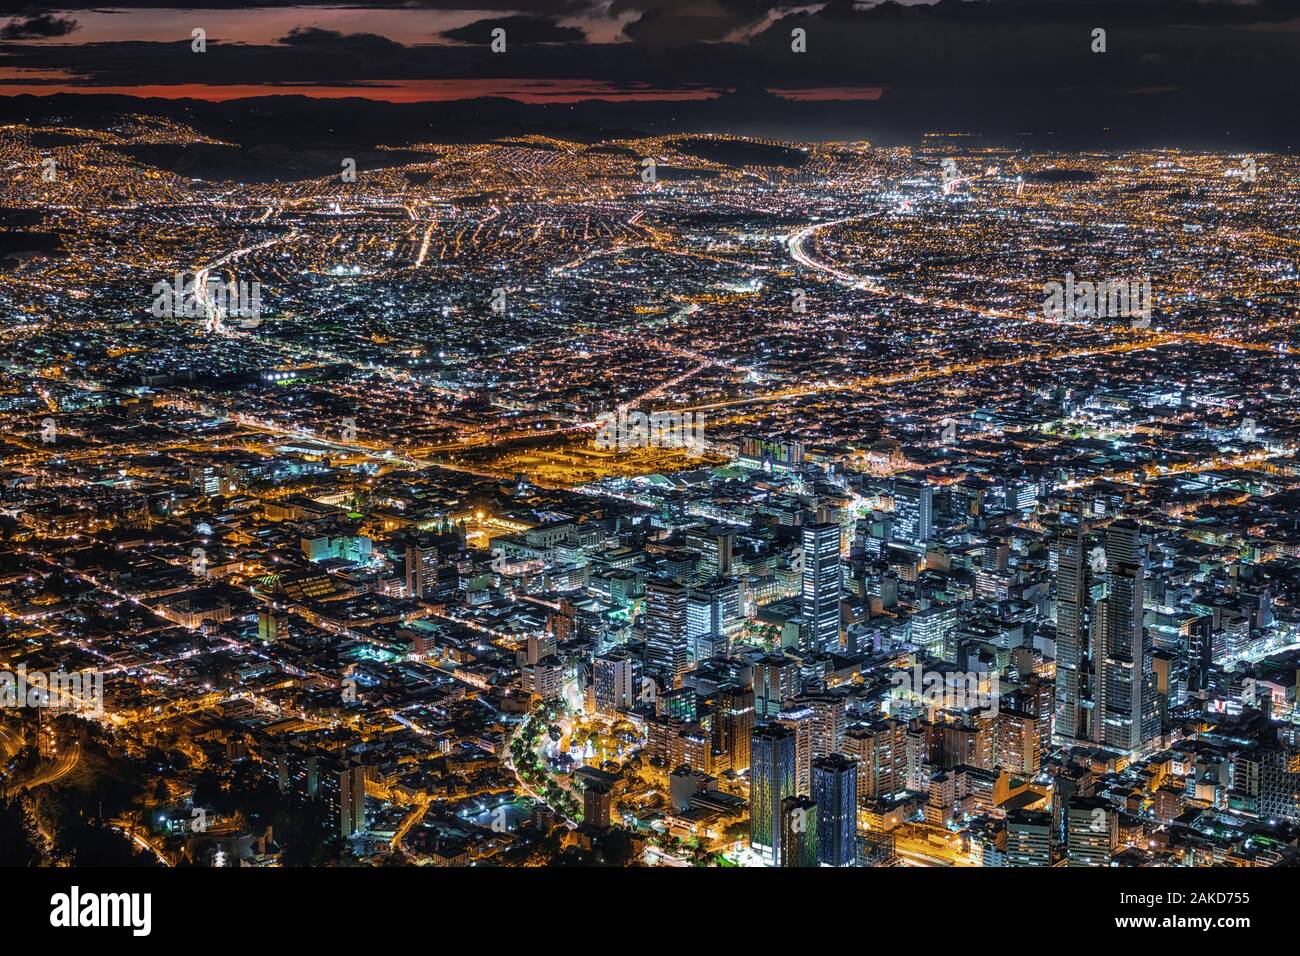 Bogota, Colombia, view of cityscape with downtown buildings illuminated at dusk. Stock Photo